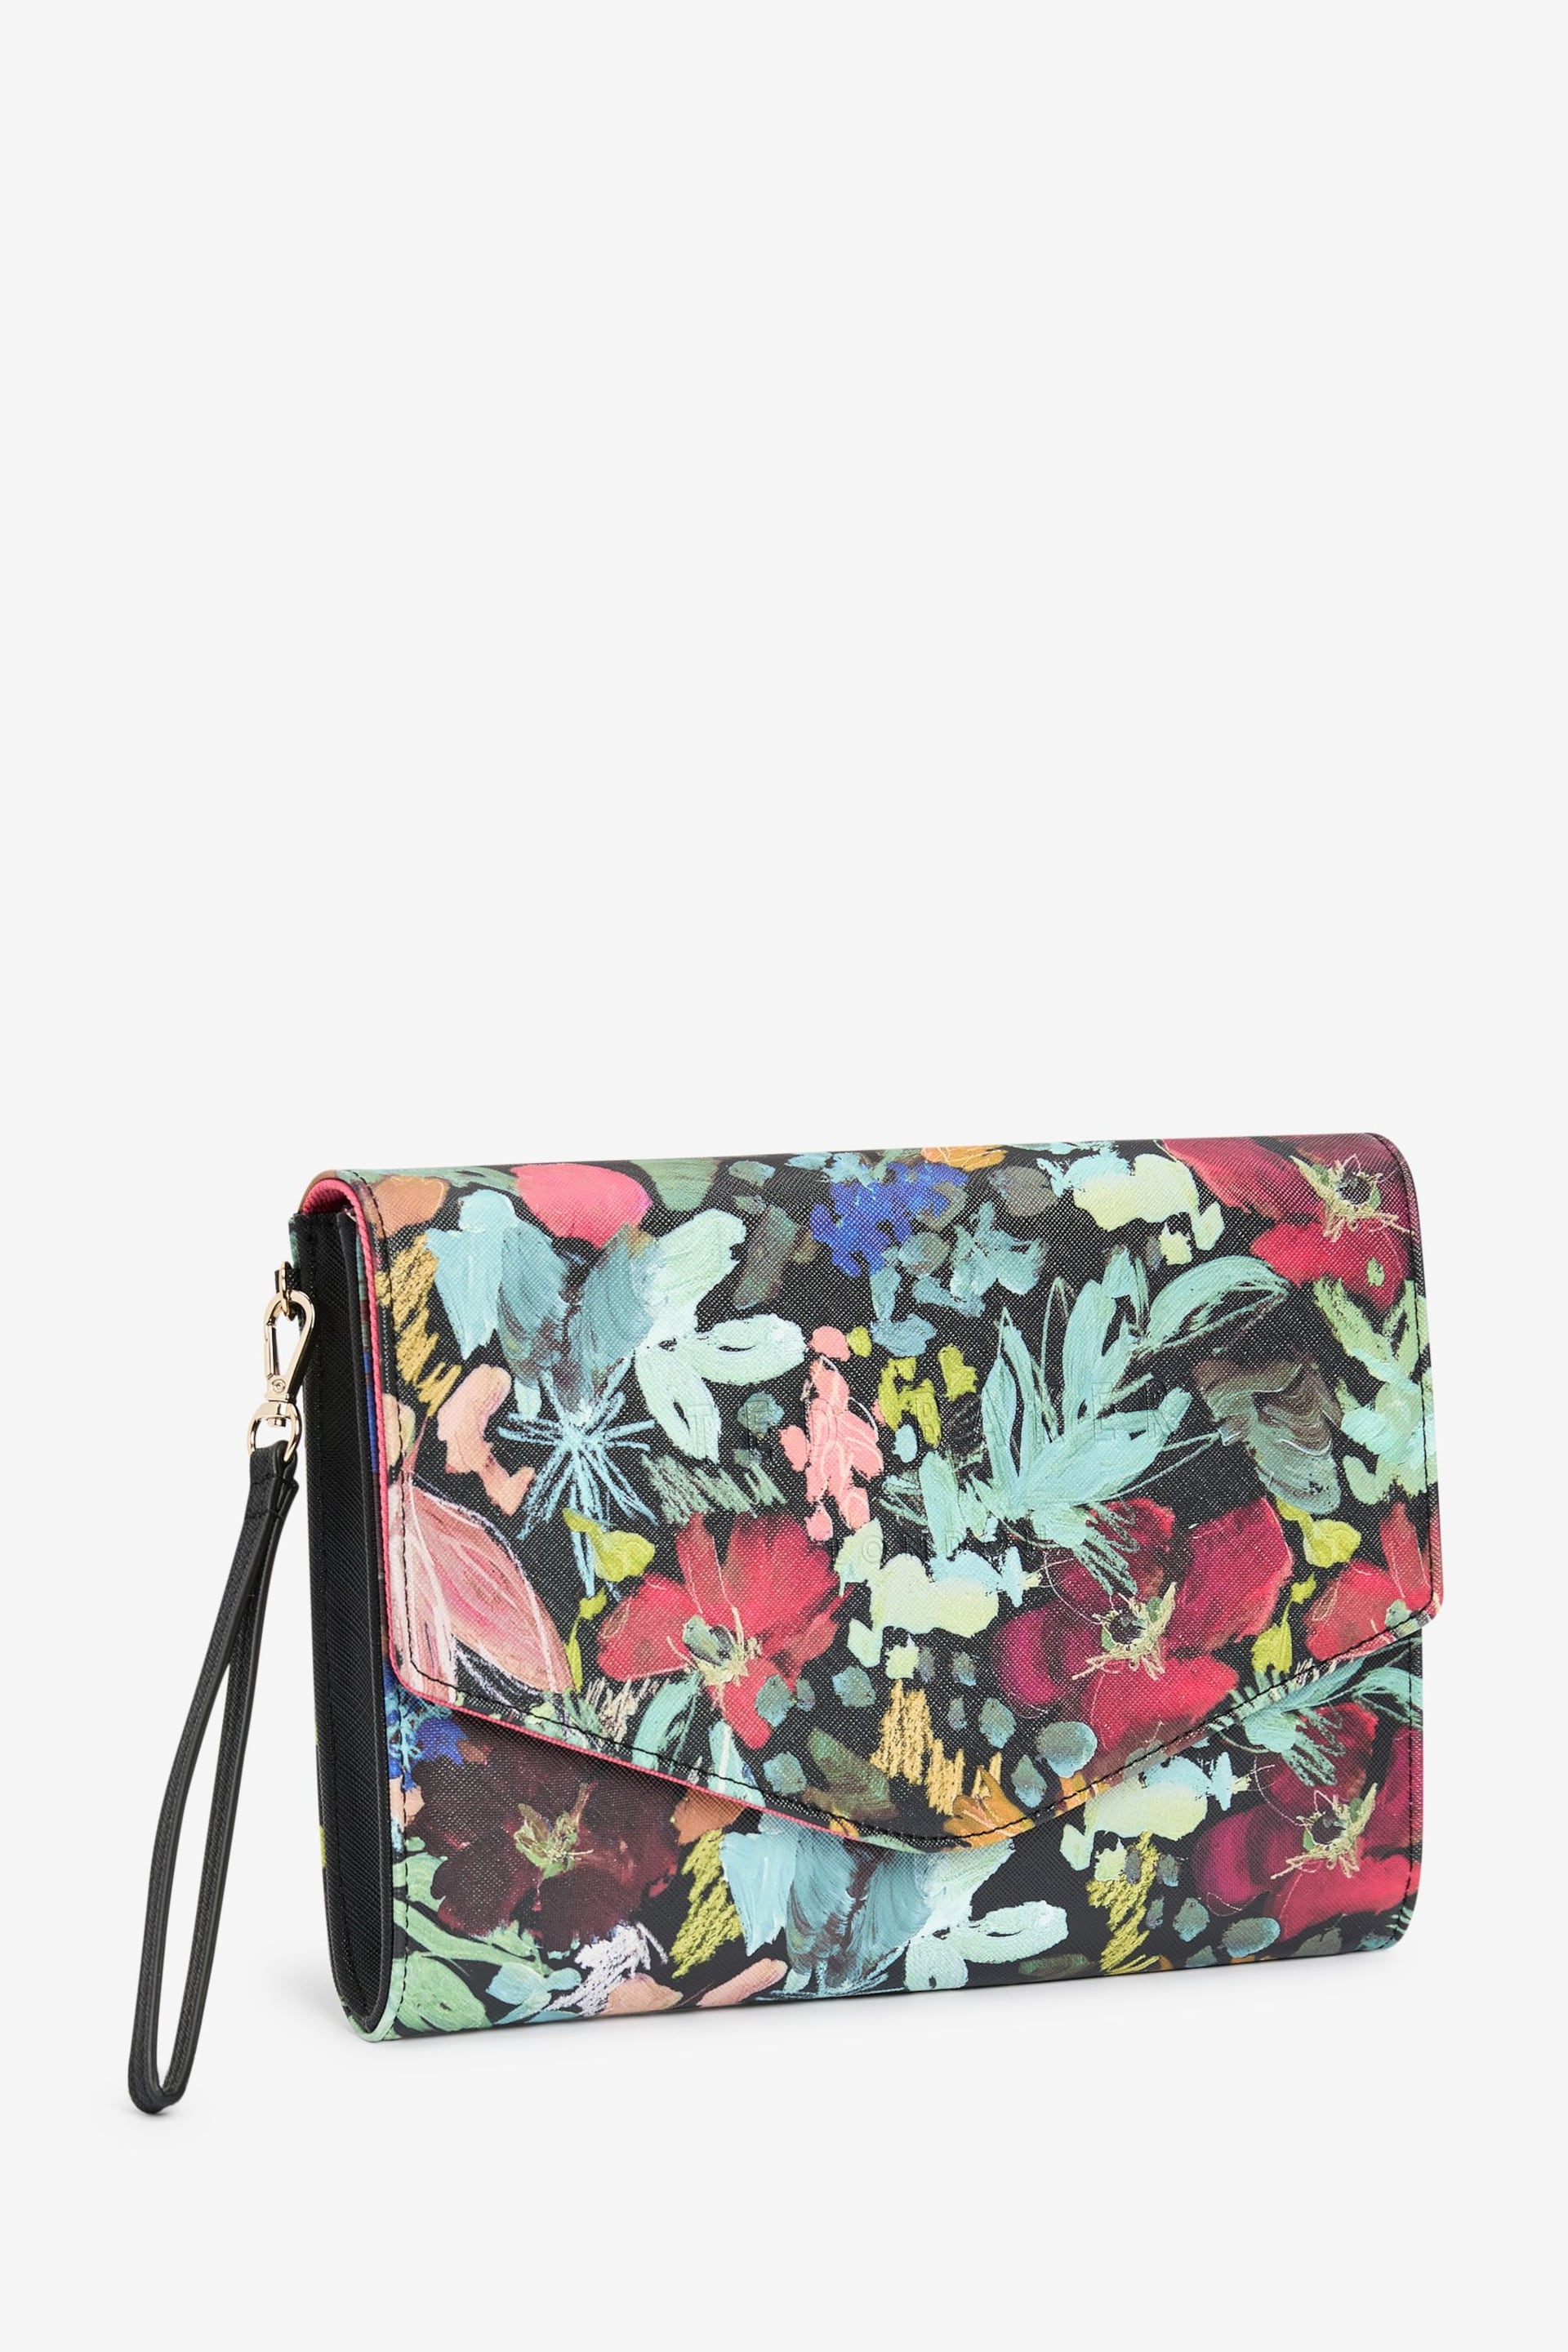 Ted Baker Black Painted Meadow Printed Beinina Pouch - Image 1 of 5